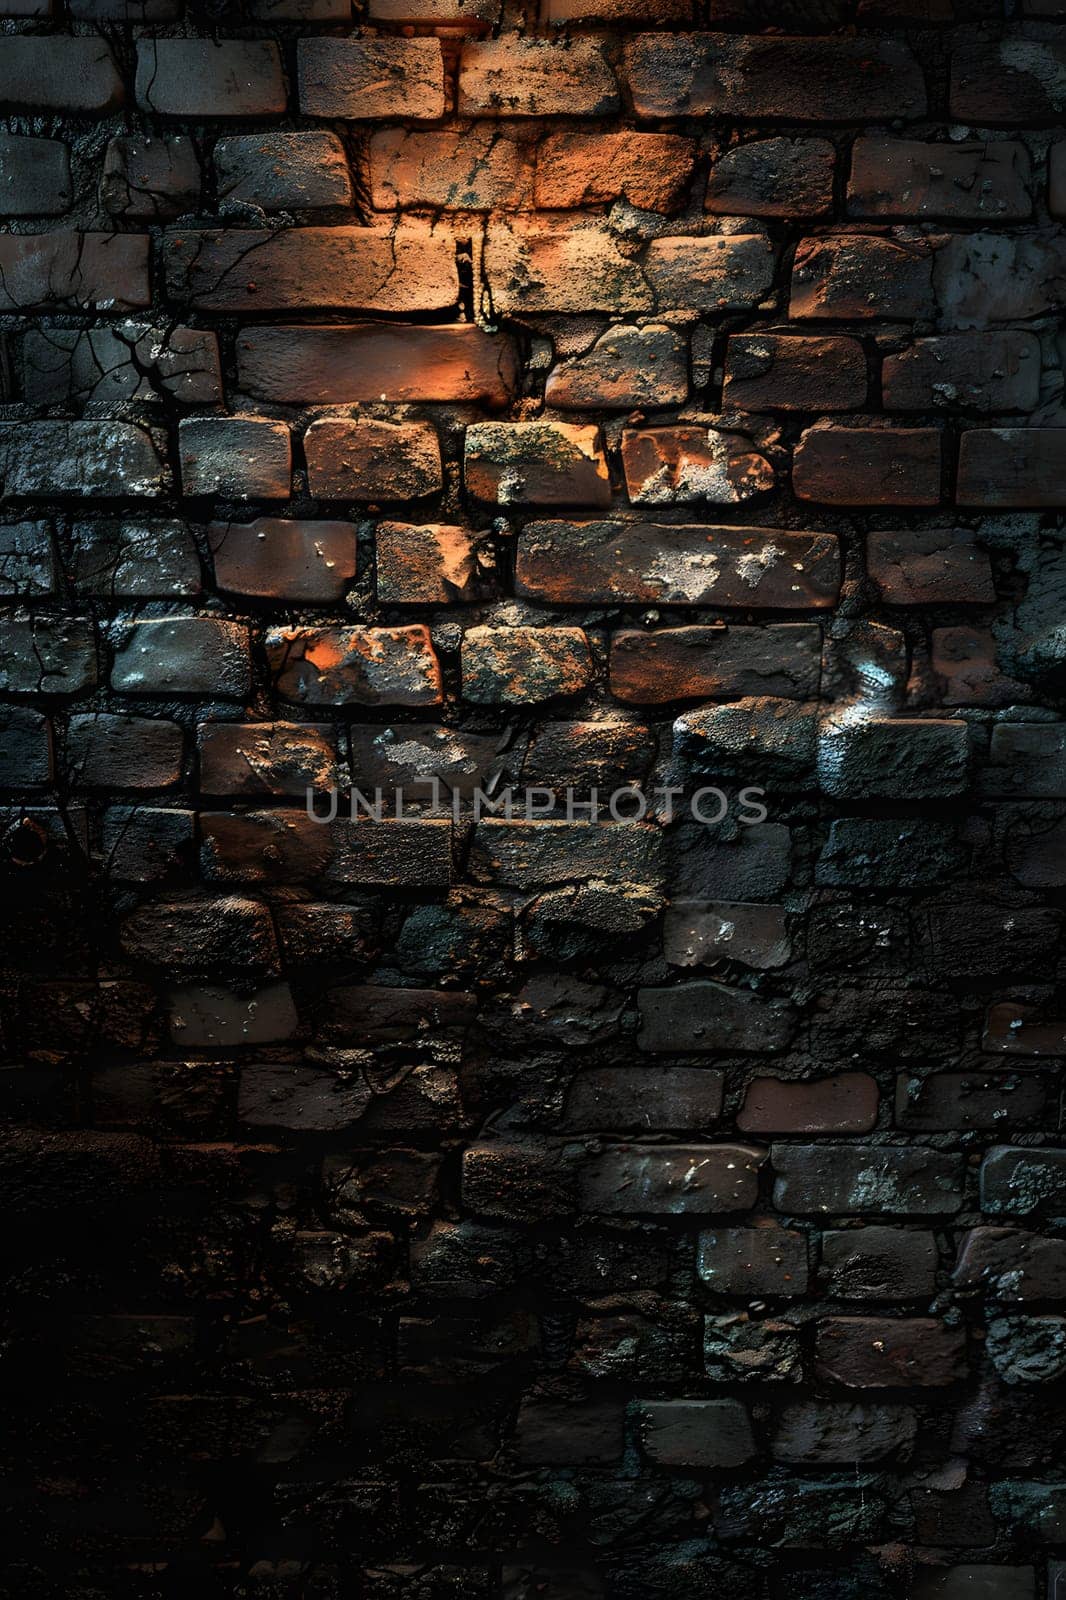 A brown brick wall illuminated by a bright light, highlighting the woodlike texture of the brickwork with tints and shades of darkness